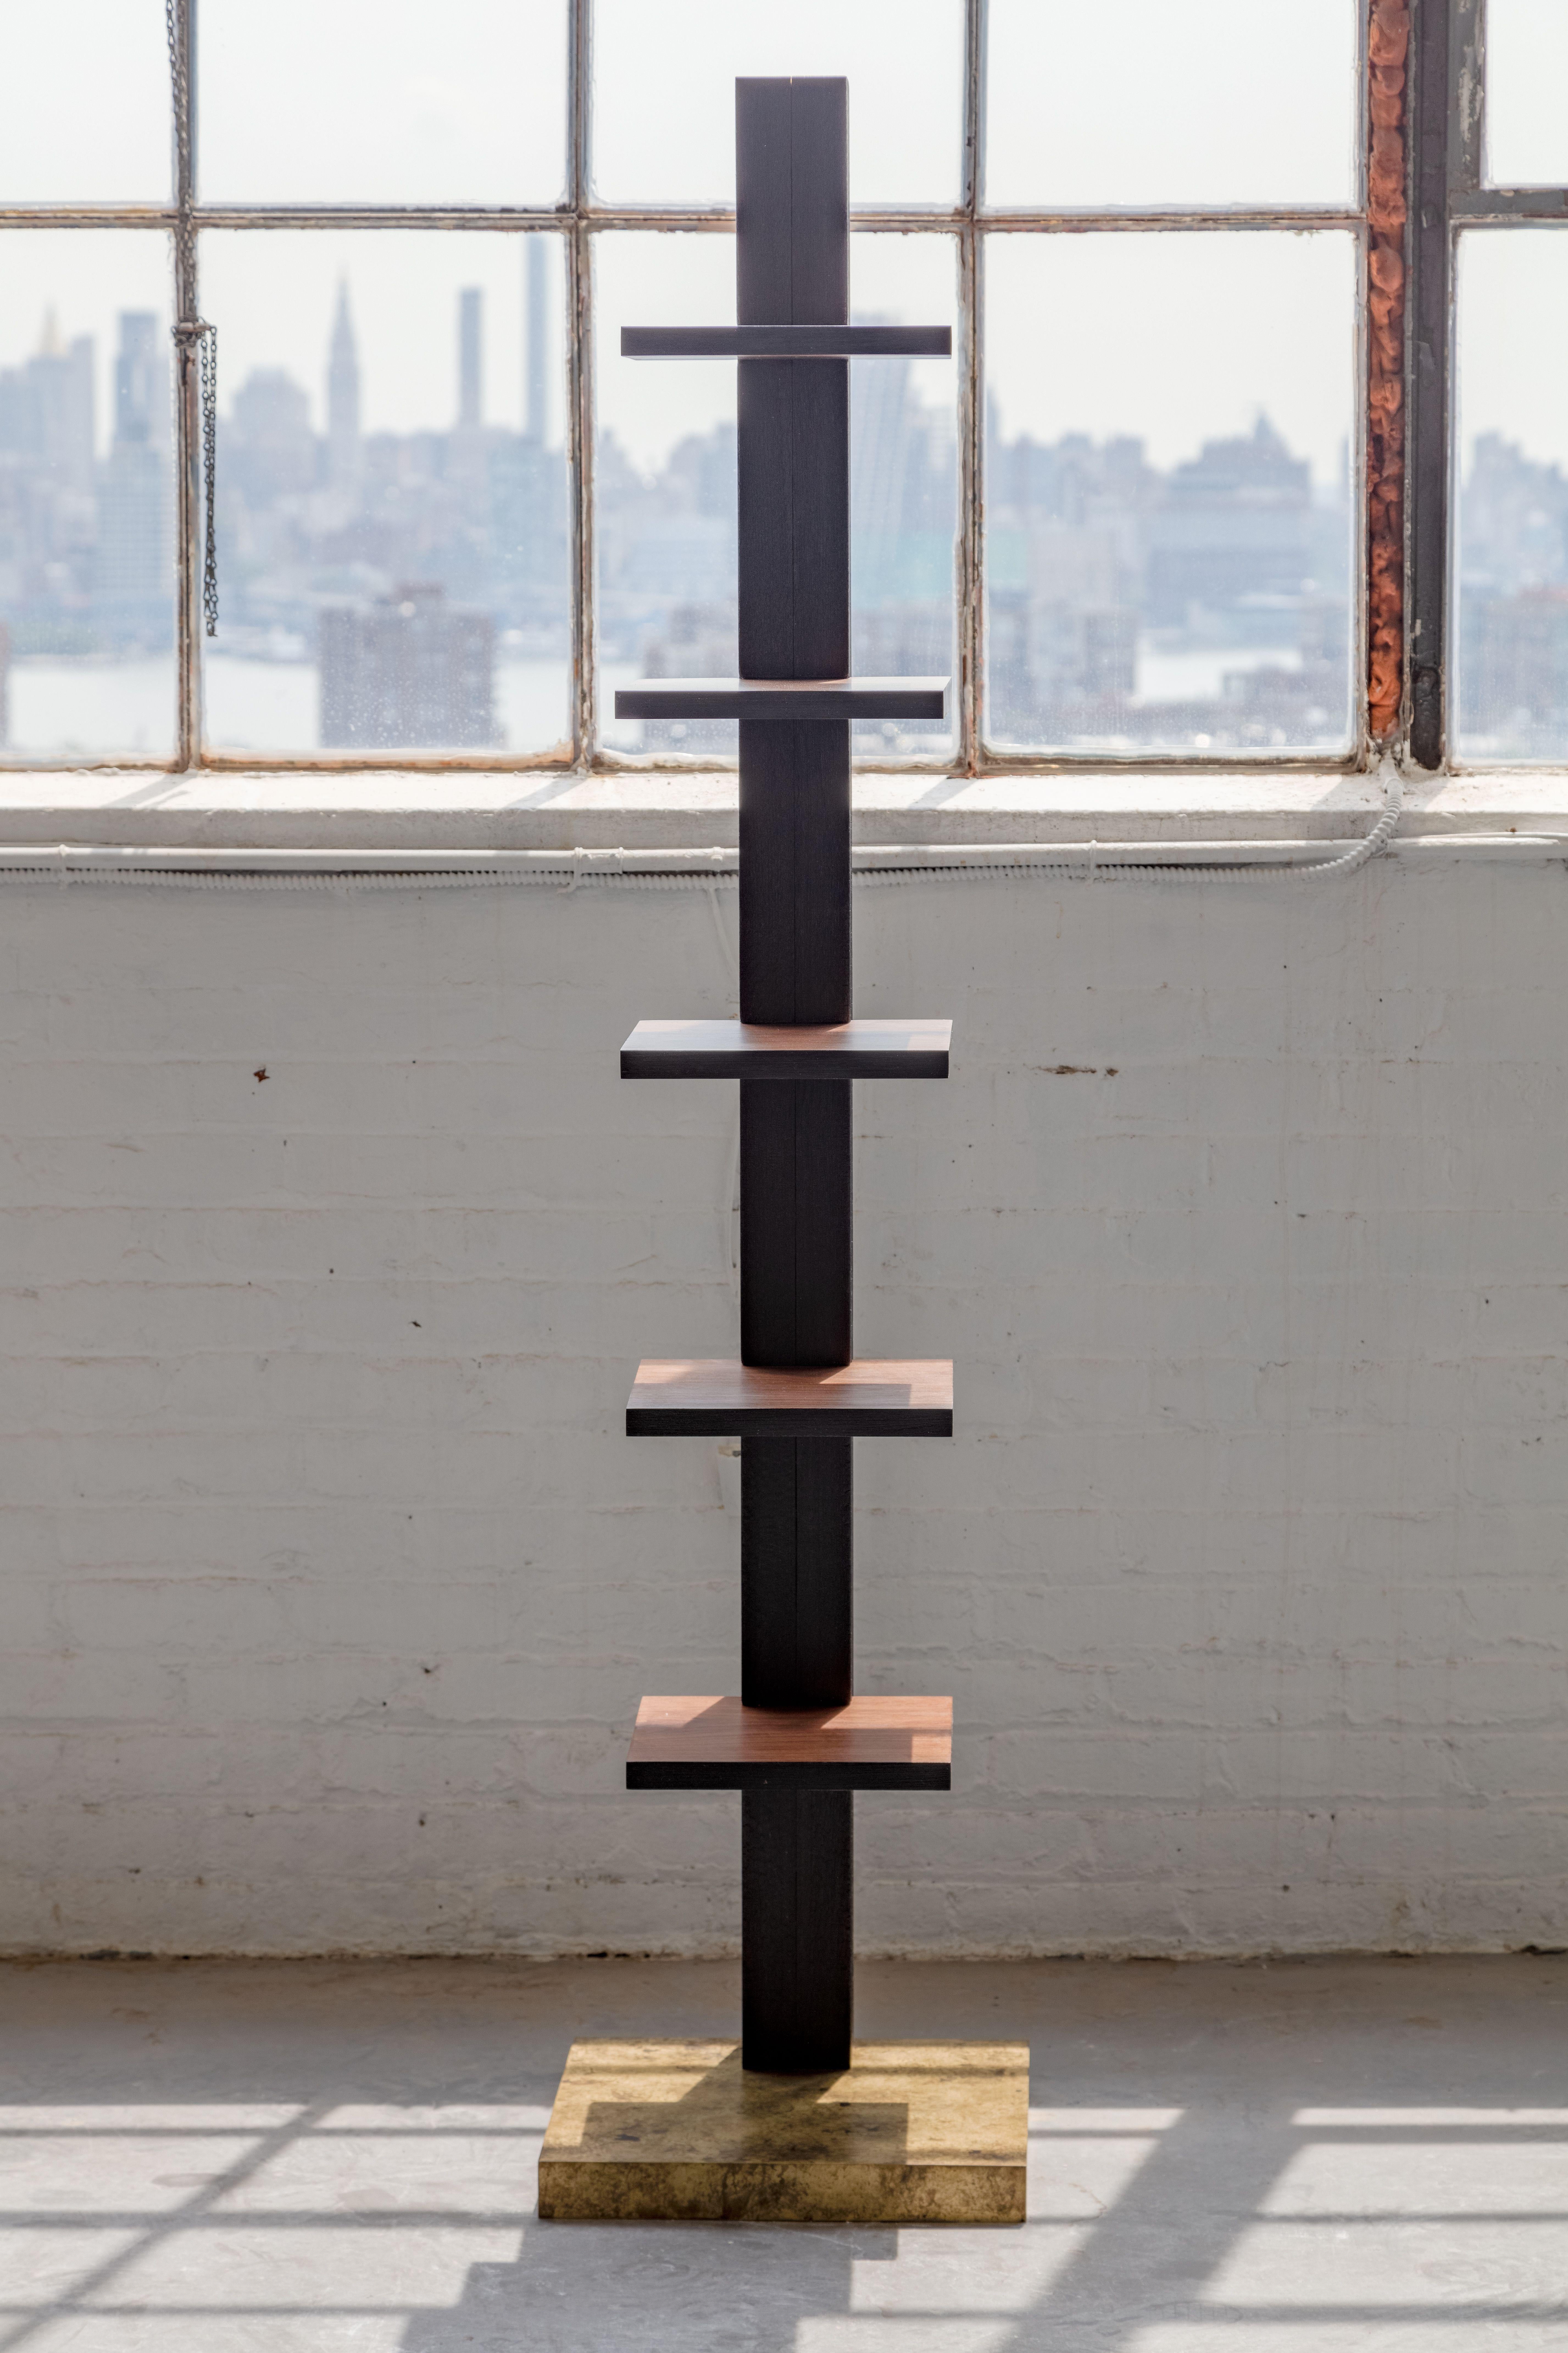 The Totem bookshelf explores a simple form with a mix of materials. Its back support is constructed from solid oak and charred black with a torch to create a scaling texture know as sho sugi ban. Each shelf is constructed from solid walnut with a